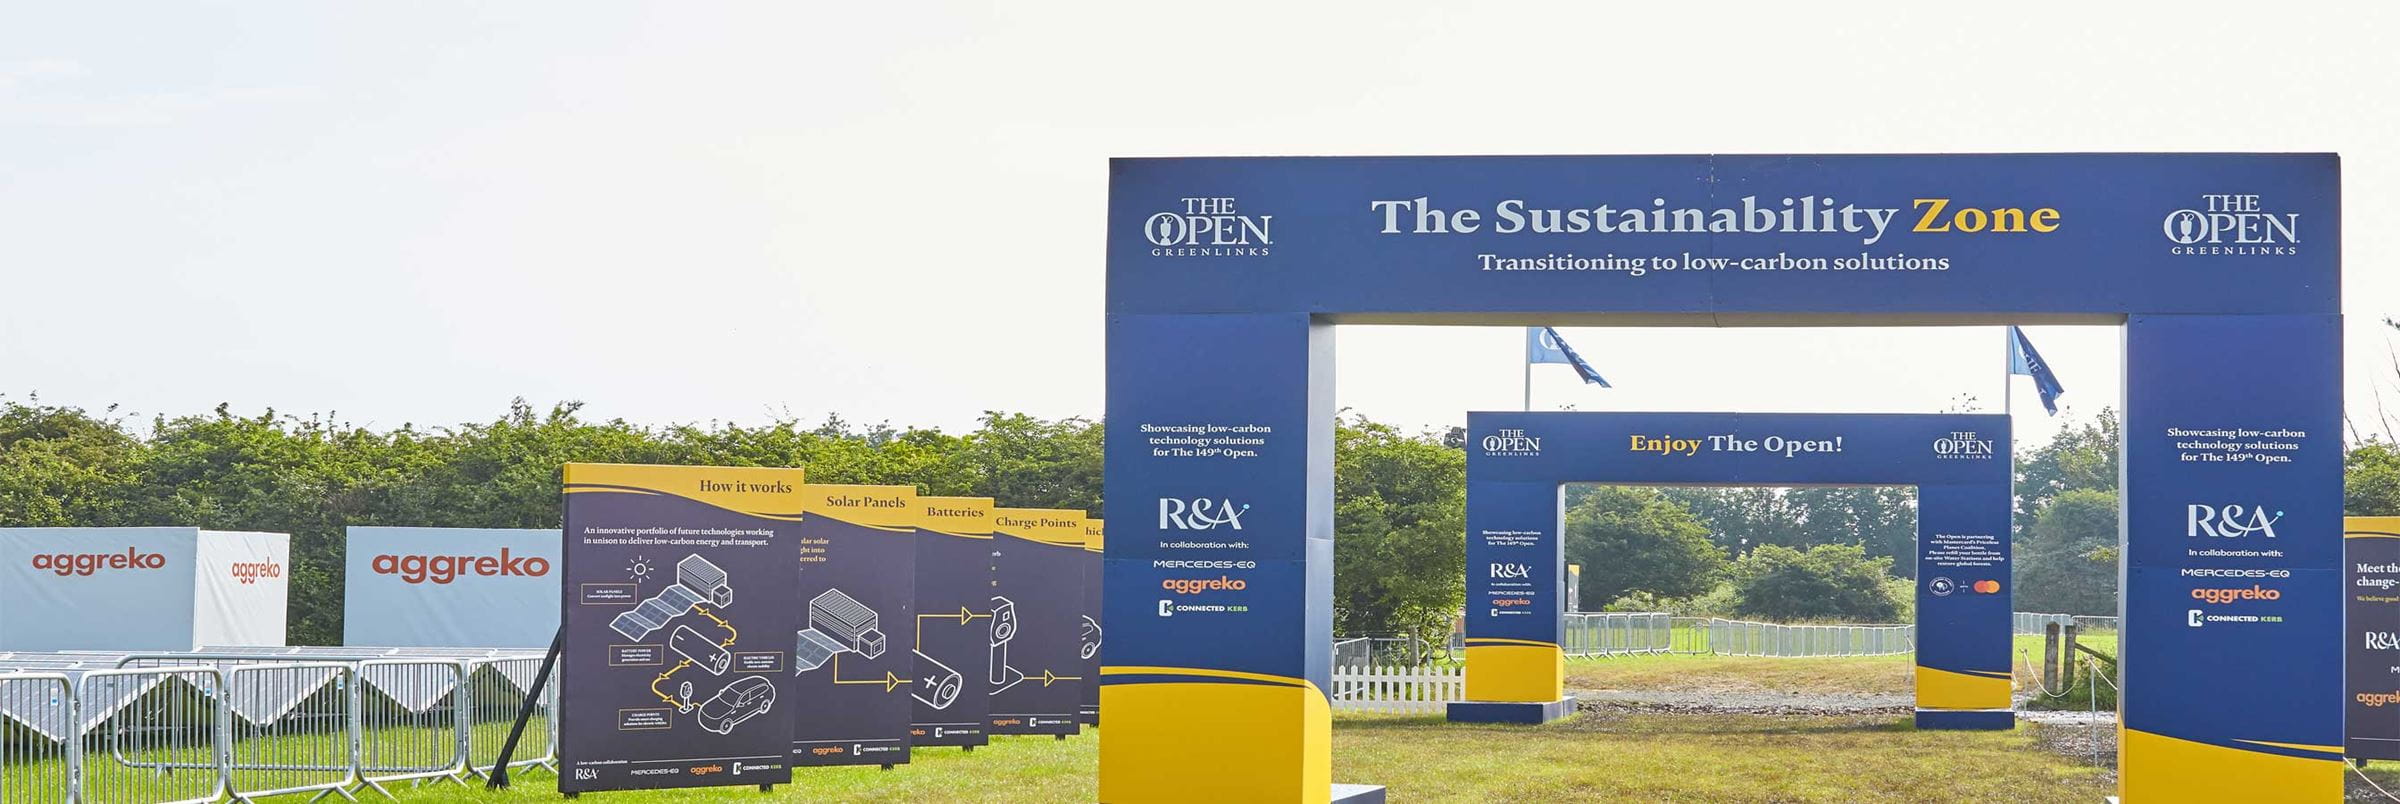 A man-made arch that indicates an entrance to The Open Golf championship, next to Aggreko power equipment